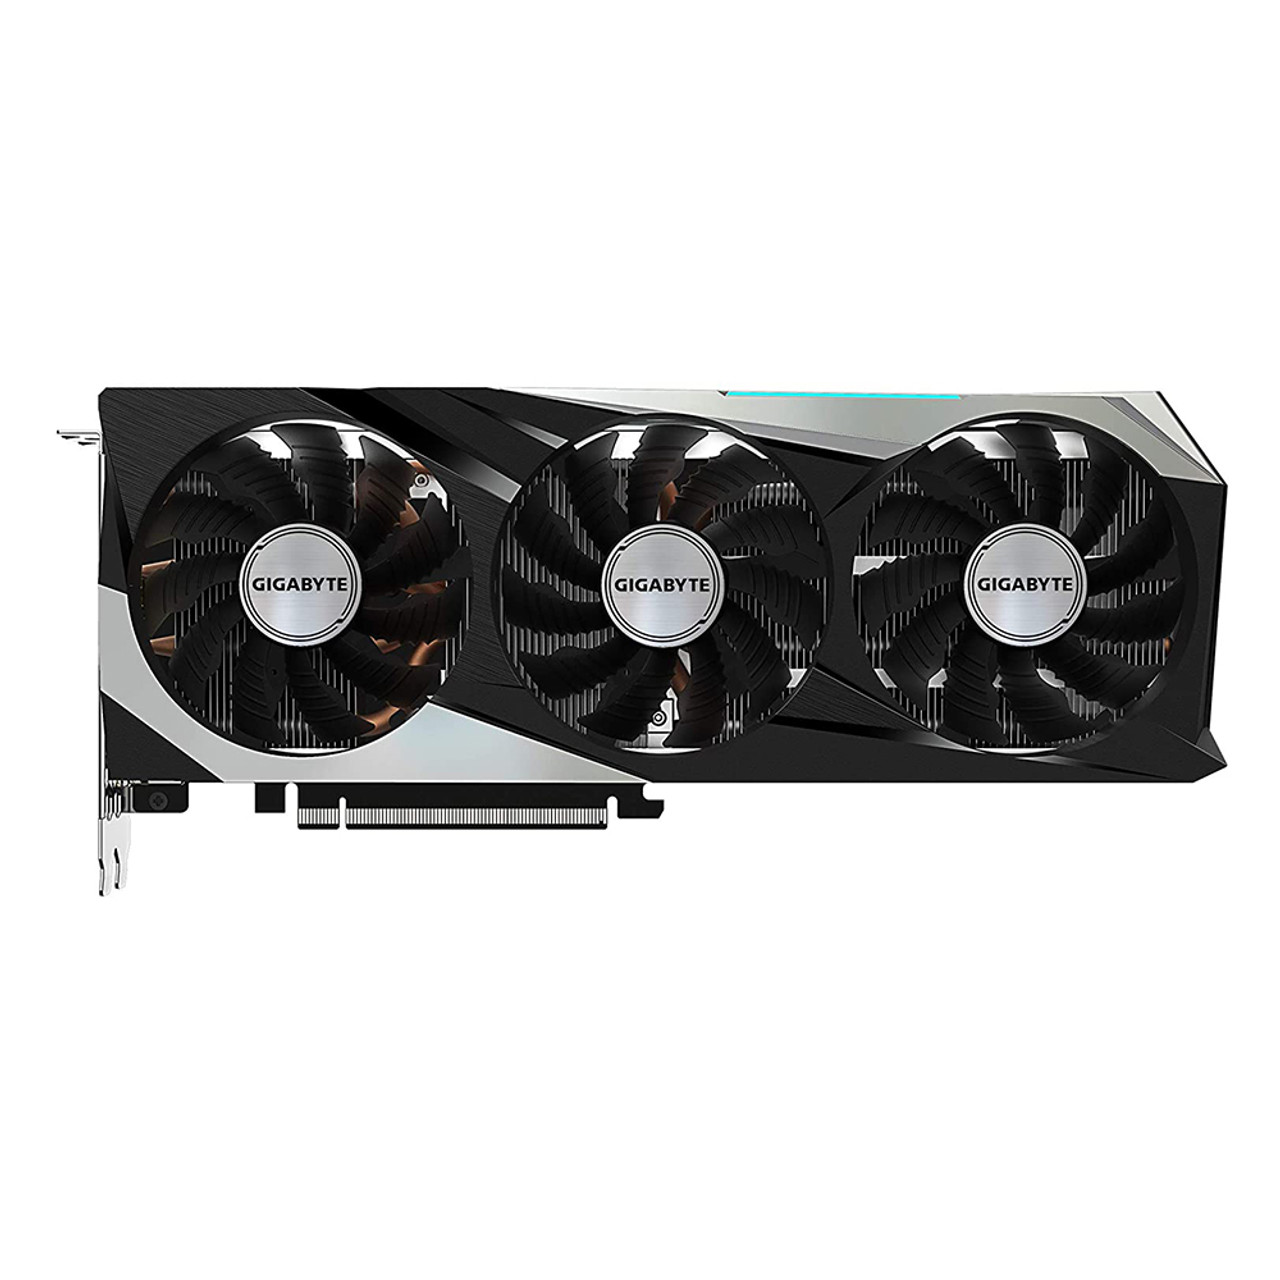 Gigaybte GV-R68GAMING OC-16GD AMD Radeon RX 6800 Gaming OC 16G Graphics Card, 16GB GDDR6 Memory, Powered by AMD RDNA 2, HDMI 2.1, WINDFORCE 3X Cooling System(Limited supply, All sales are final)